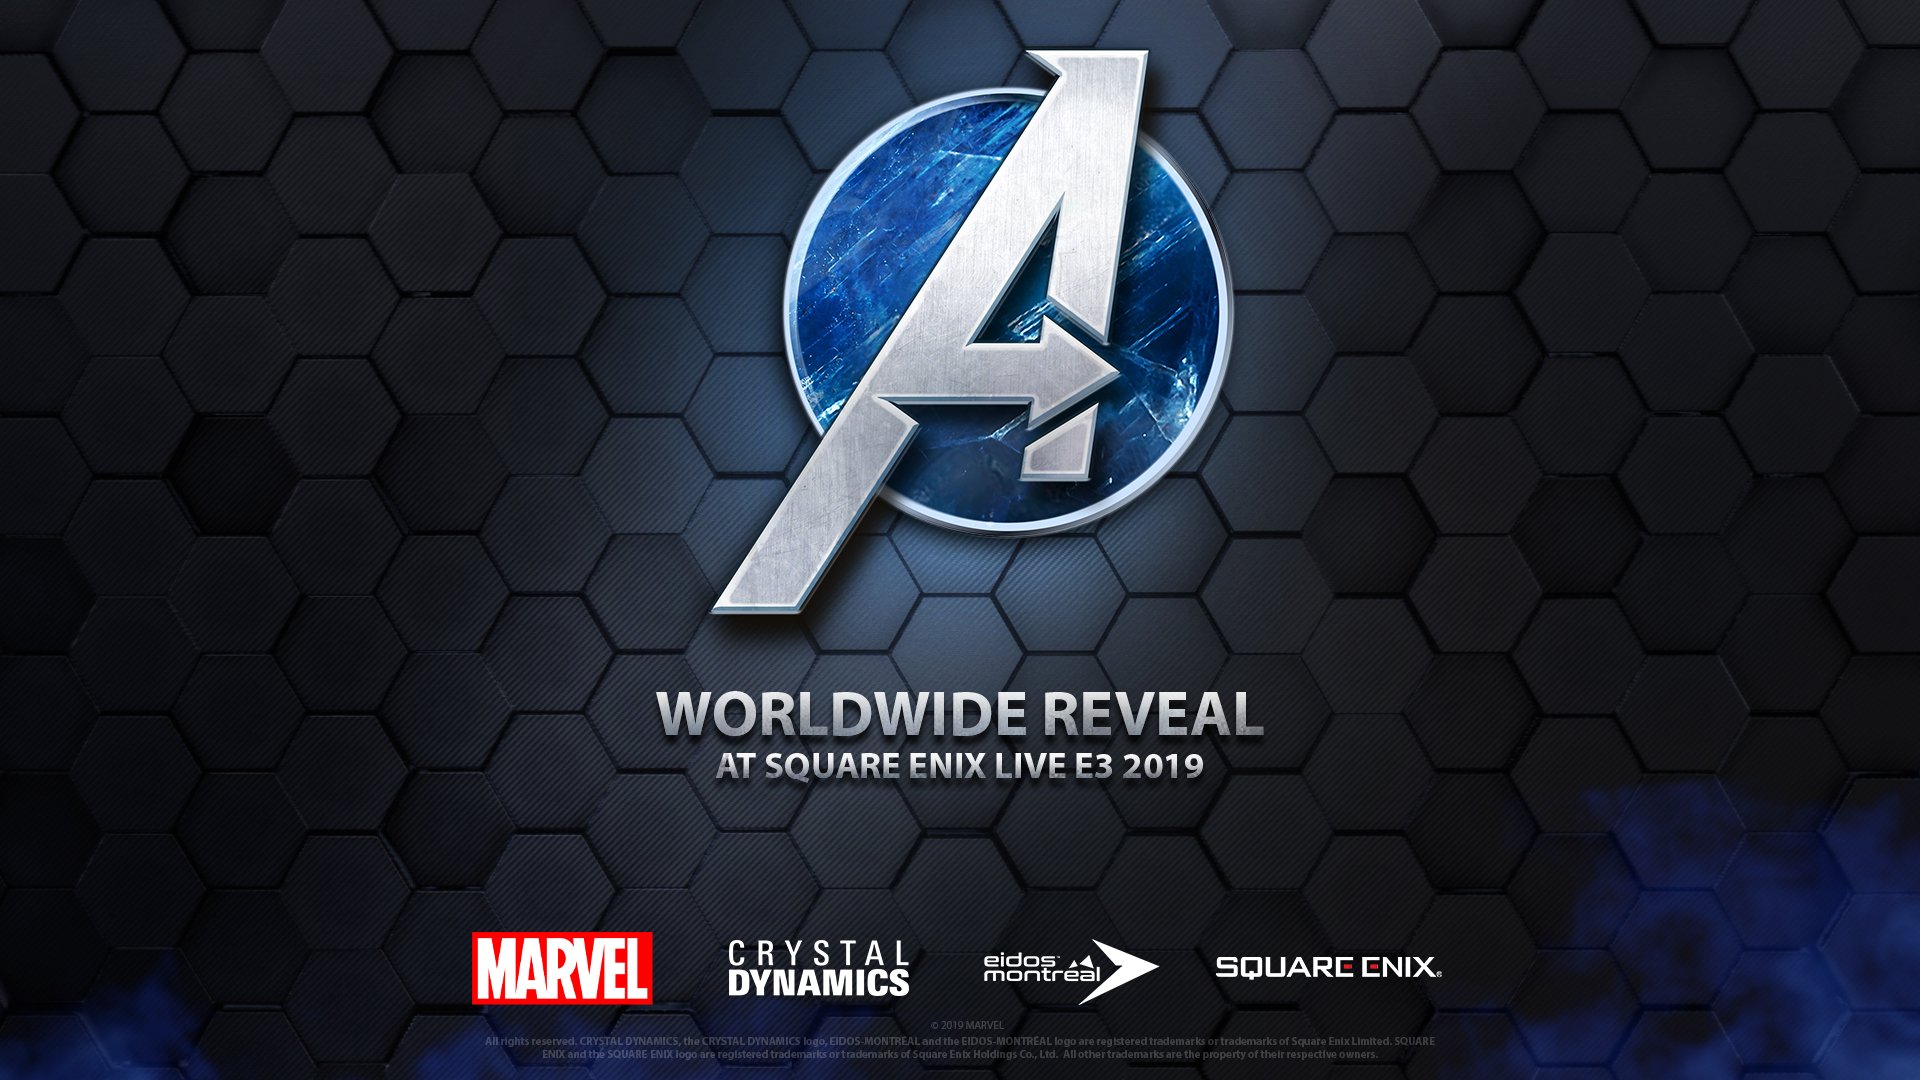 Square Enix’s Avengers Video Game Is Coming To E3!